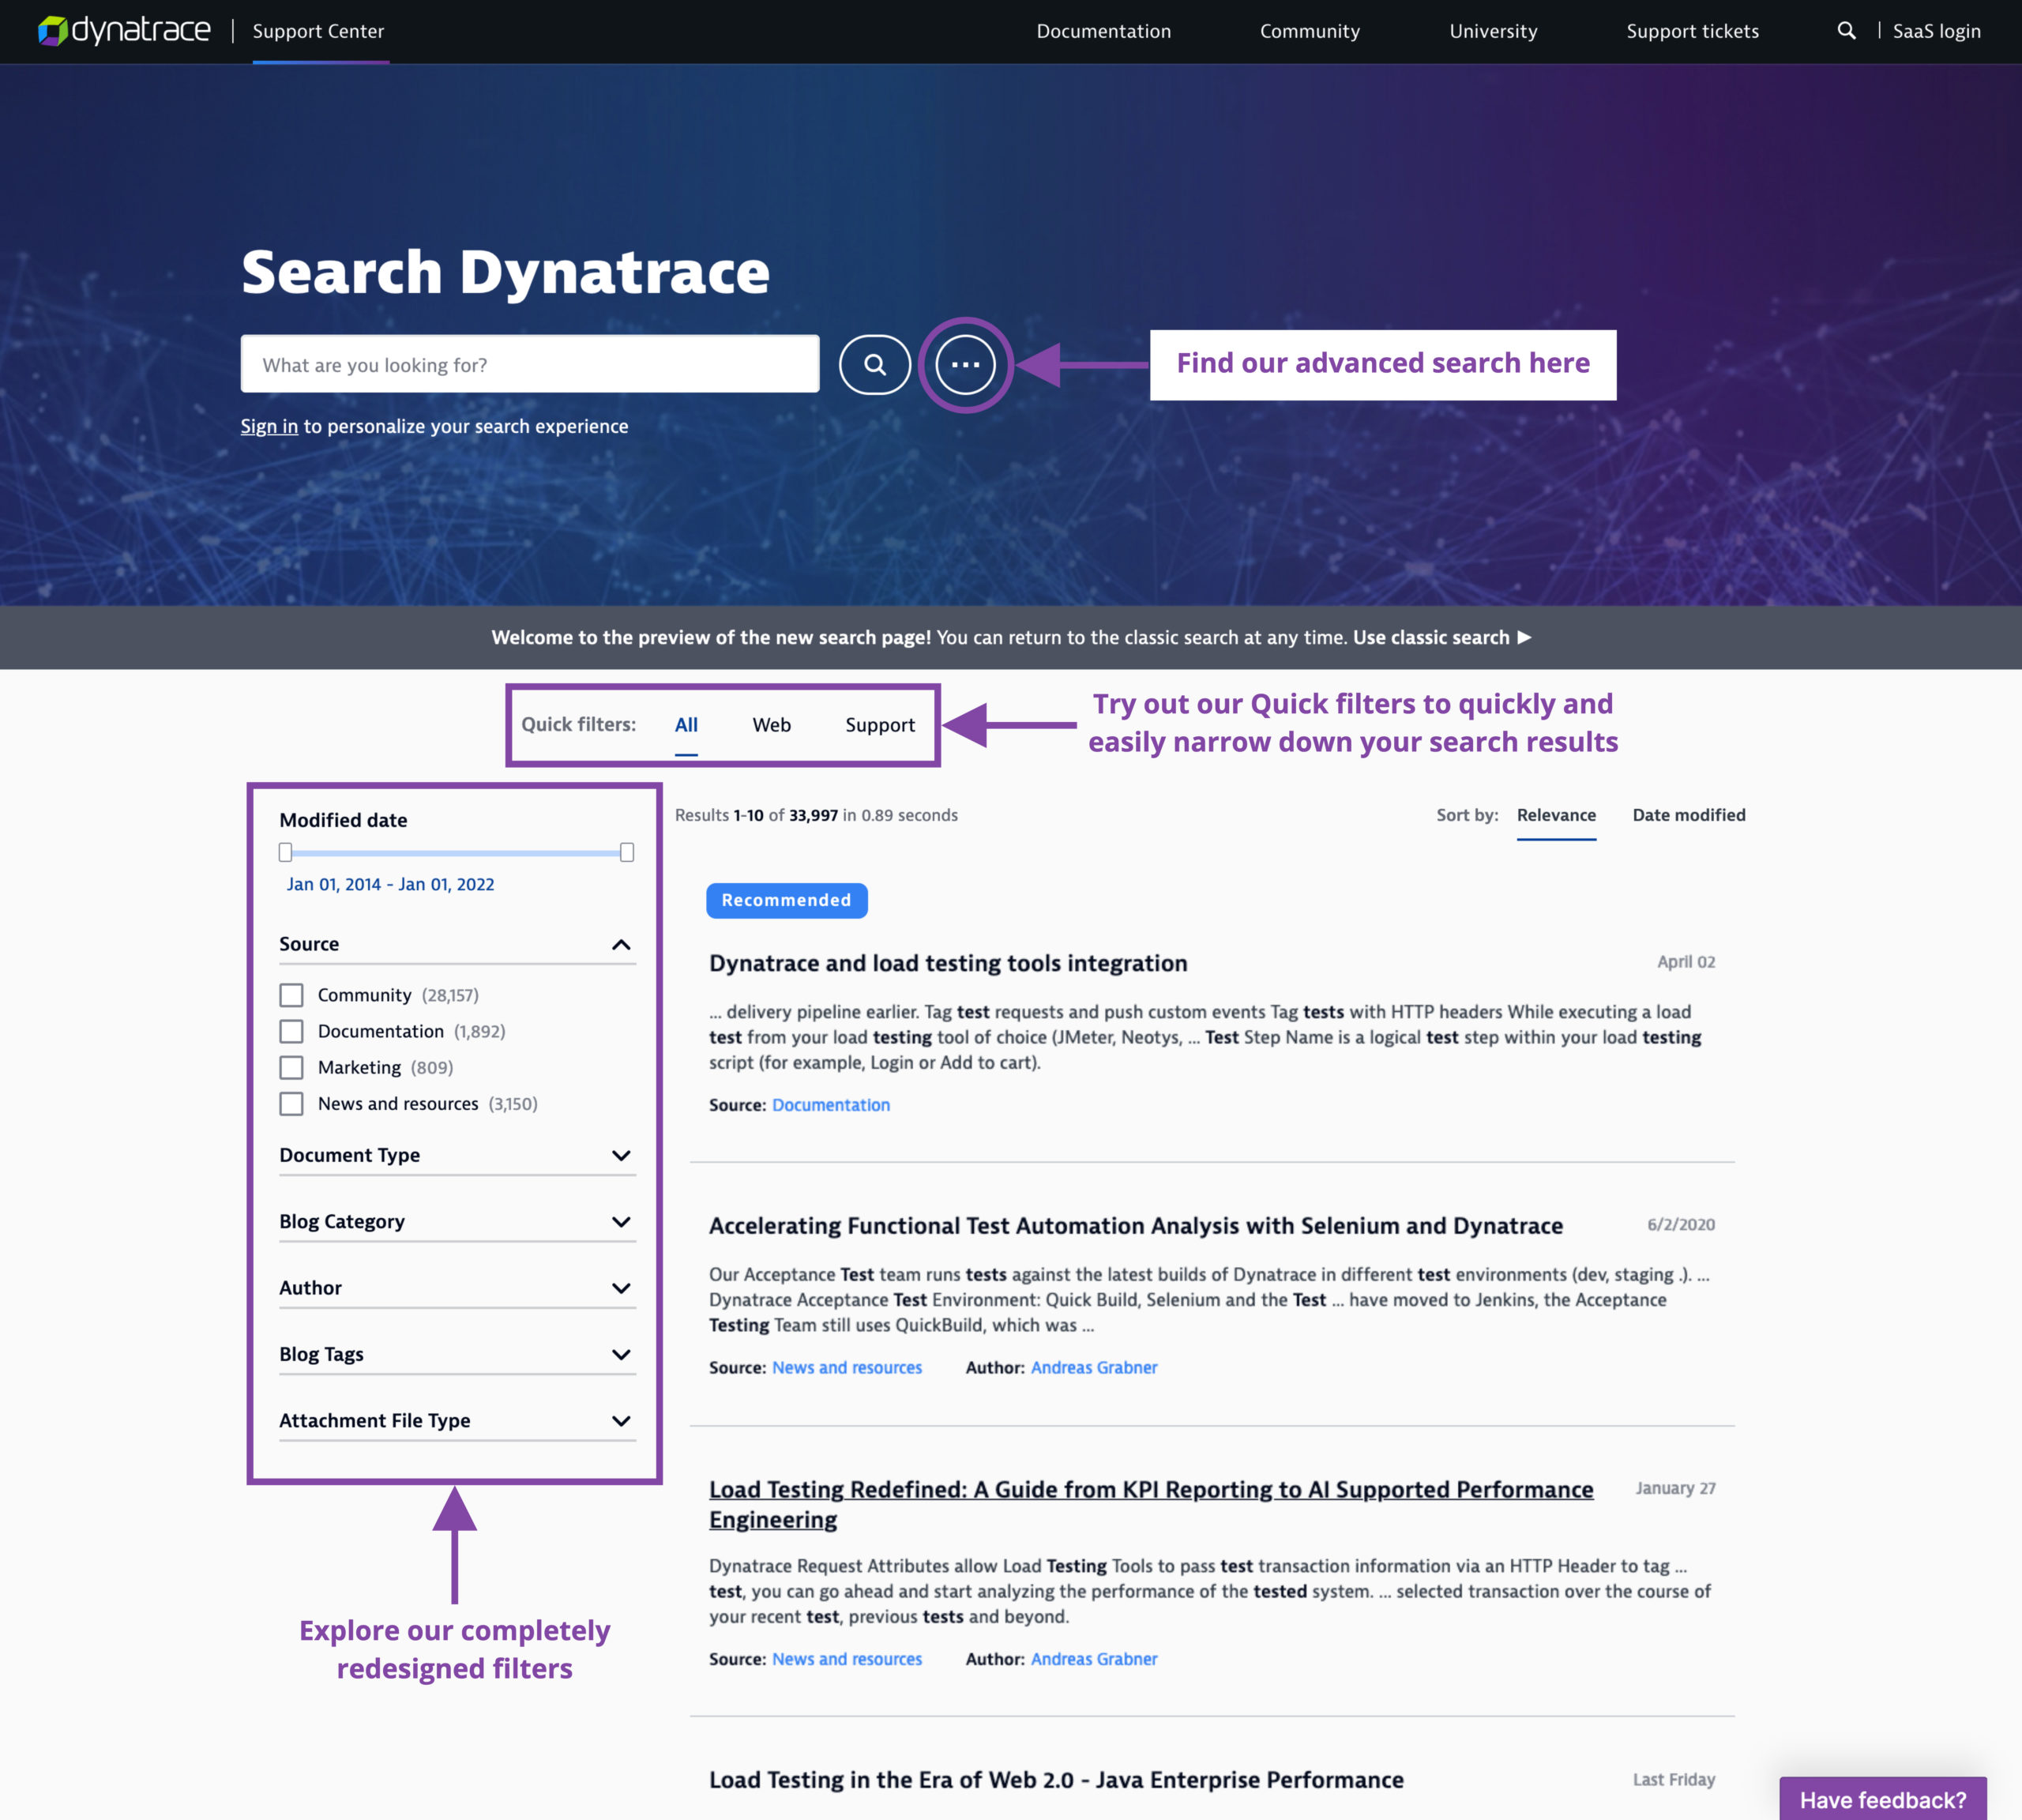 Screenshot of Dynatrace's new search experience